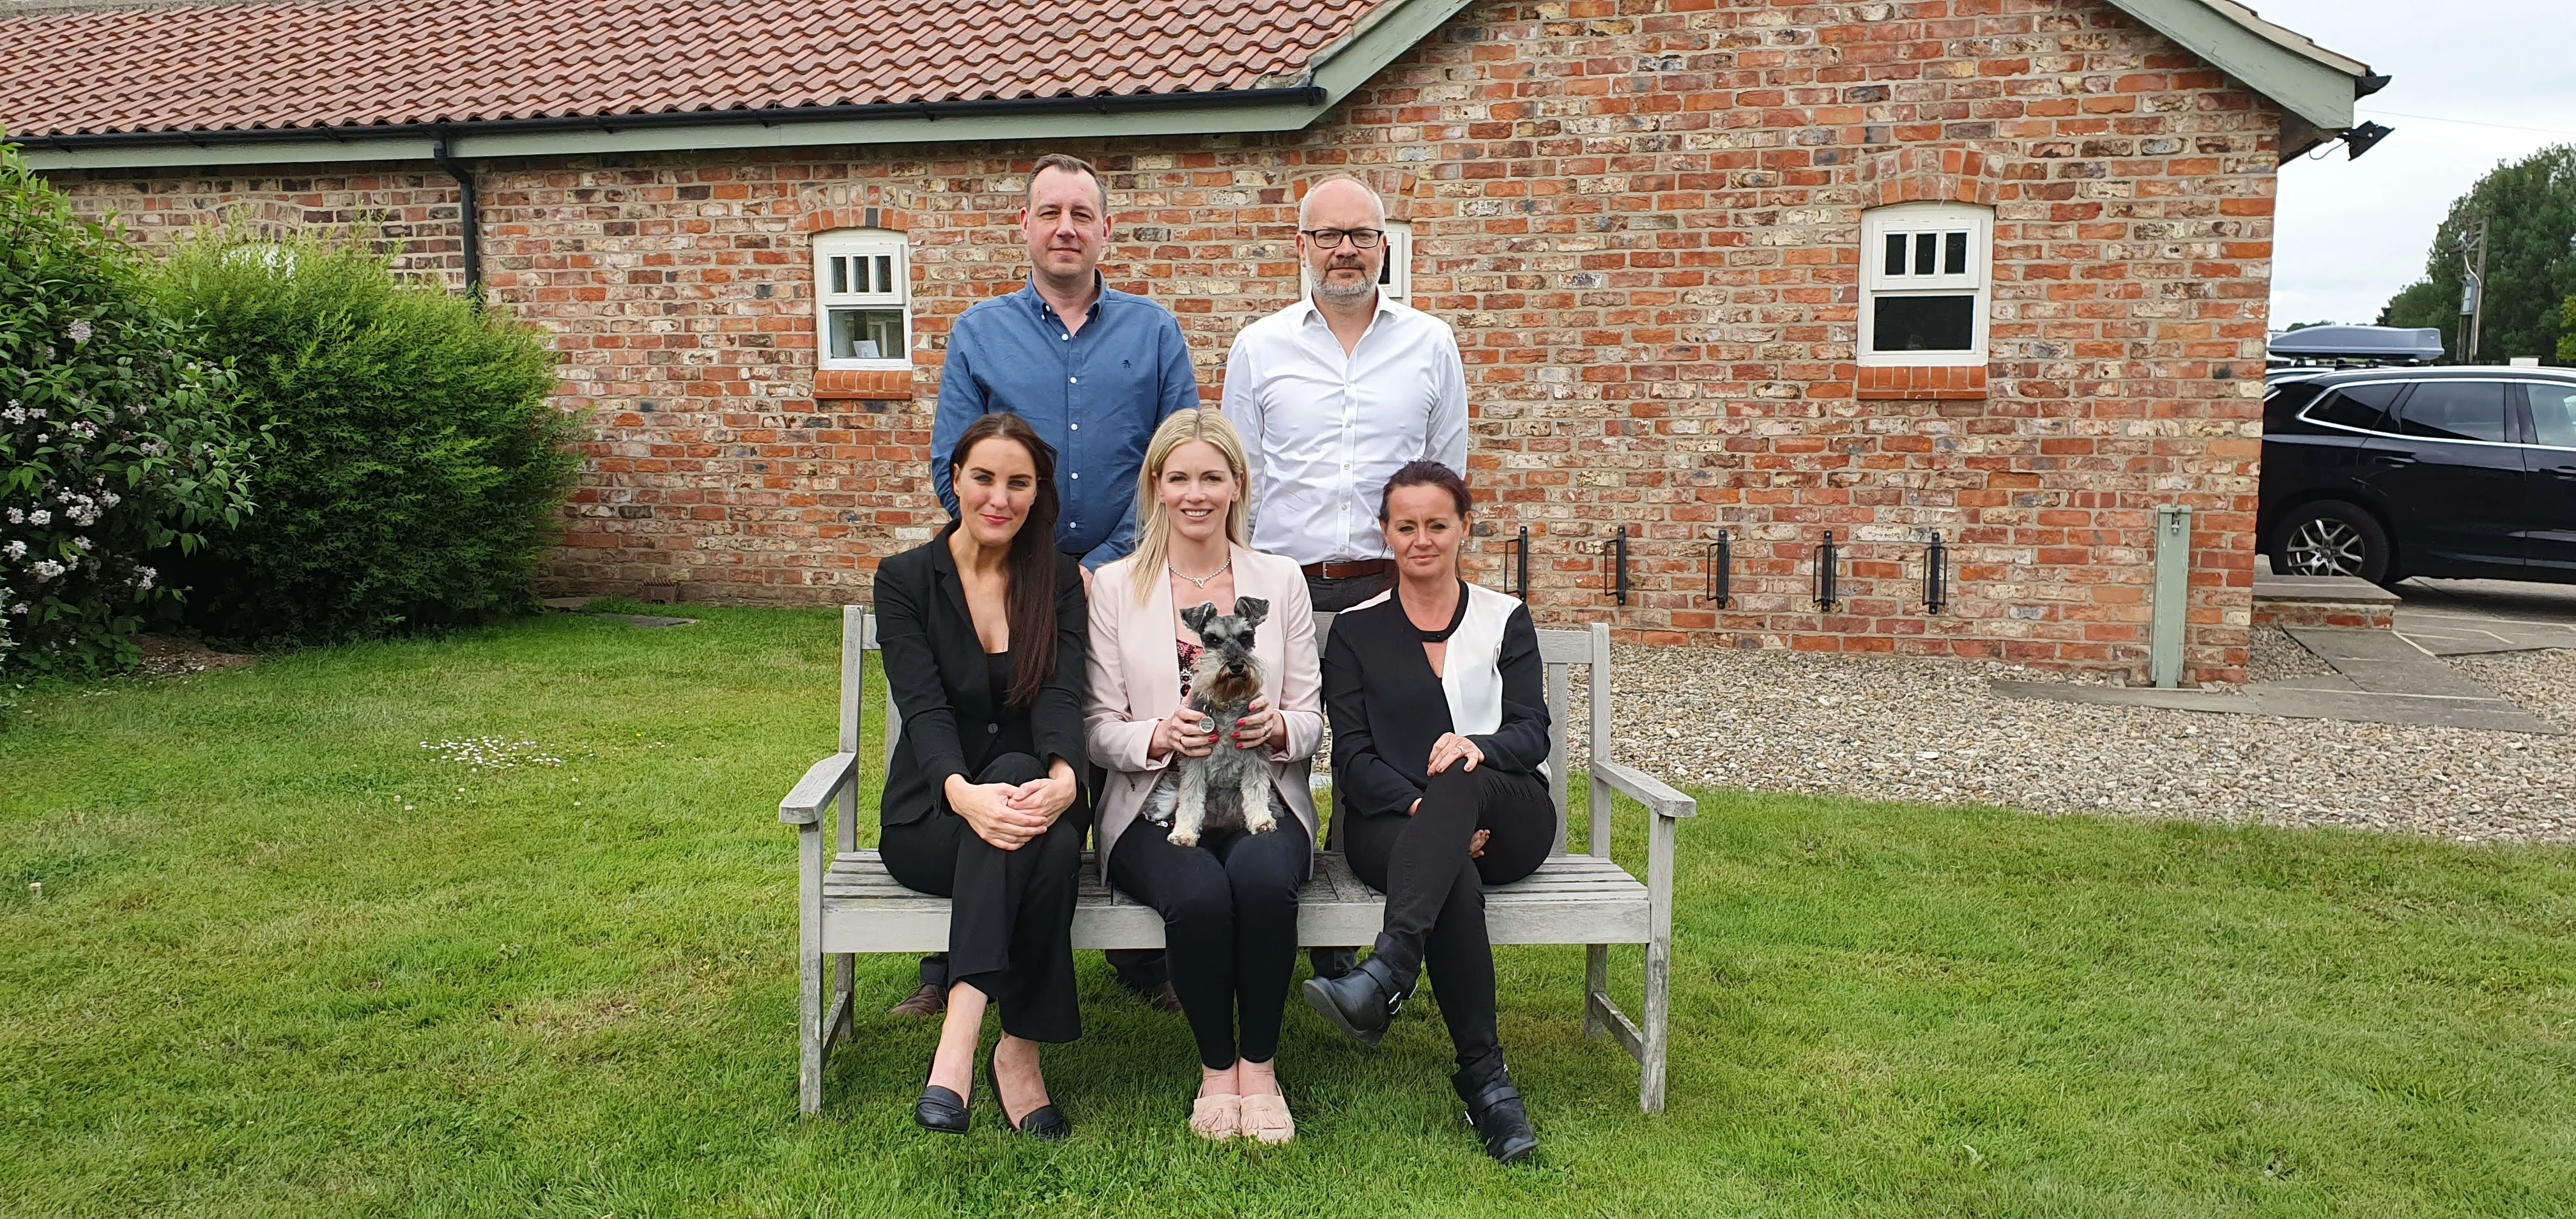 (Top L-R) Martin Wilson- Veterinary Recruitment Consultant, Chris Worthington- Managing Director (Bottom L-R) Gabrielle Dawson- Veterinary Recruitment Consultant, Anna Worthington- Finance and Payroll Manager, Suzy Buttress- Administrator 